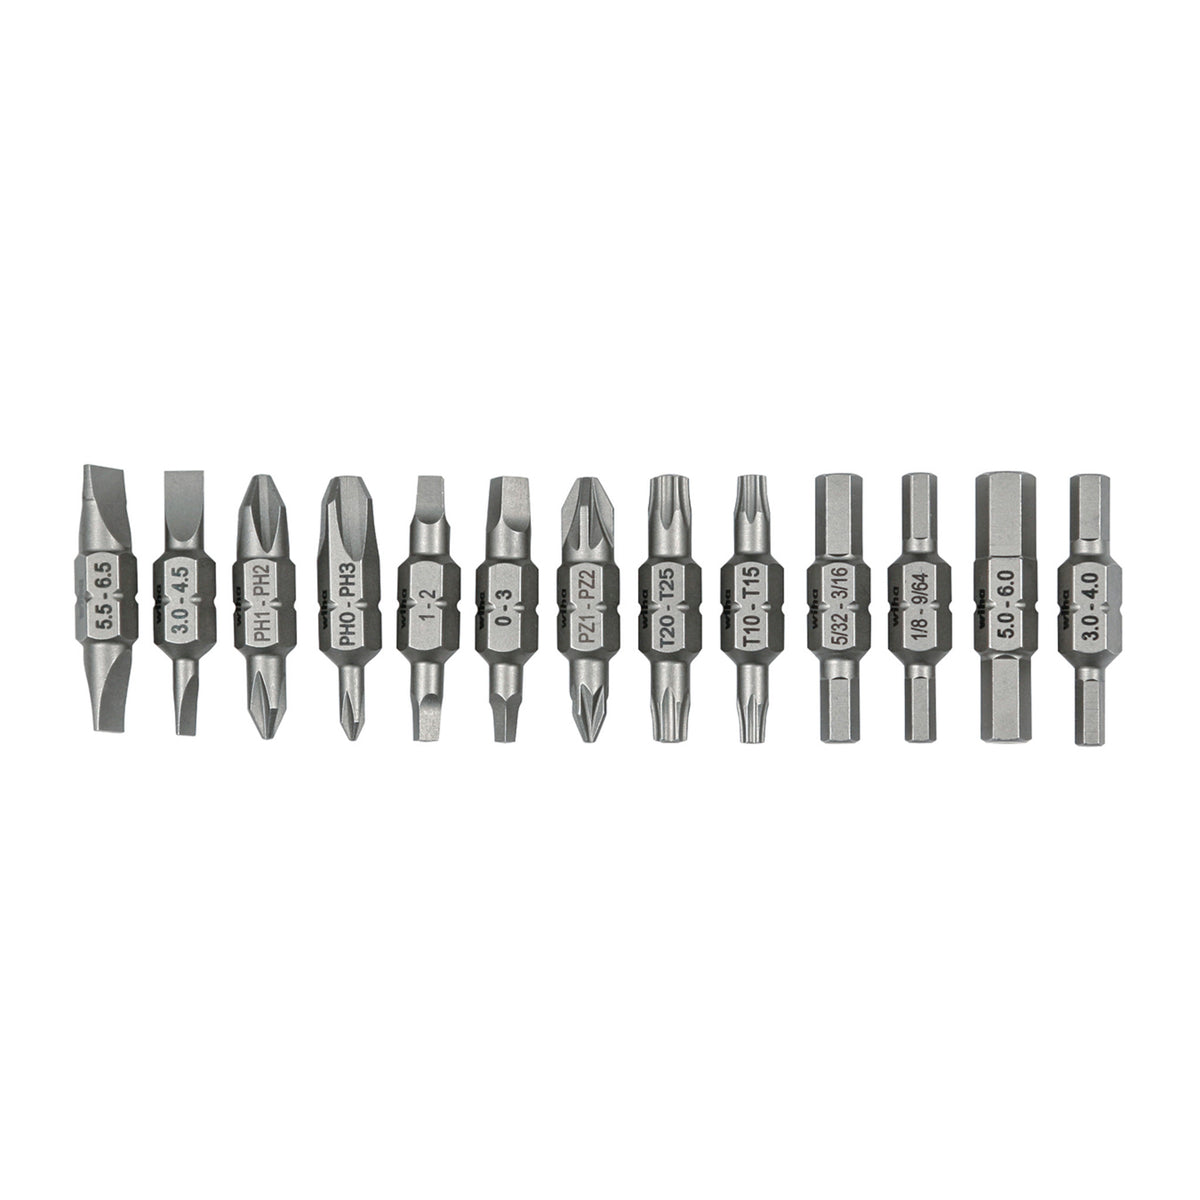 Wiha 77780 13 Piece Double End Bit Reload Set for Tradesman 26-In-1 Ultra Driver